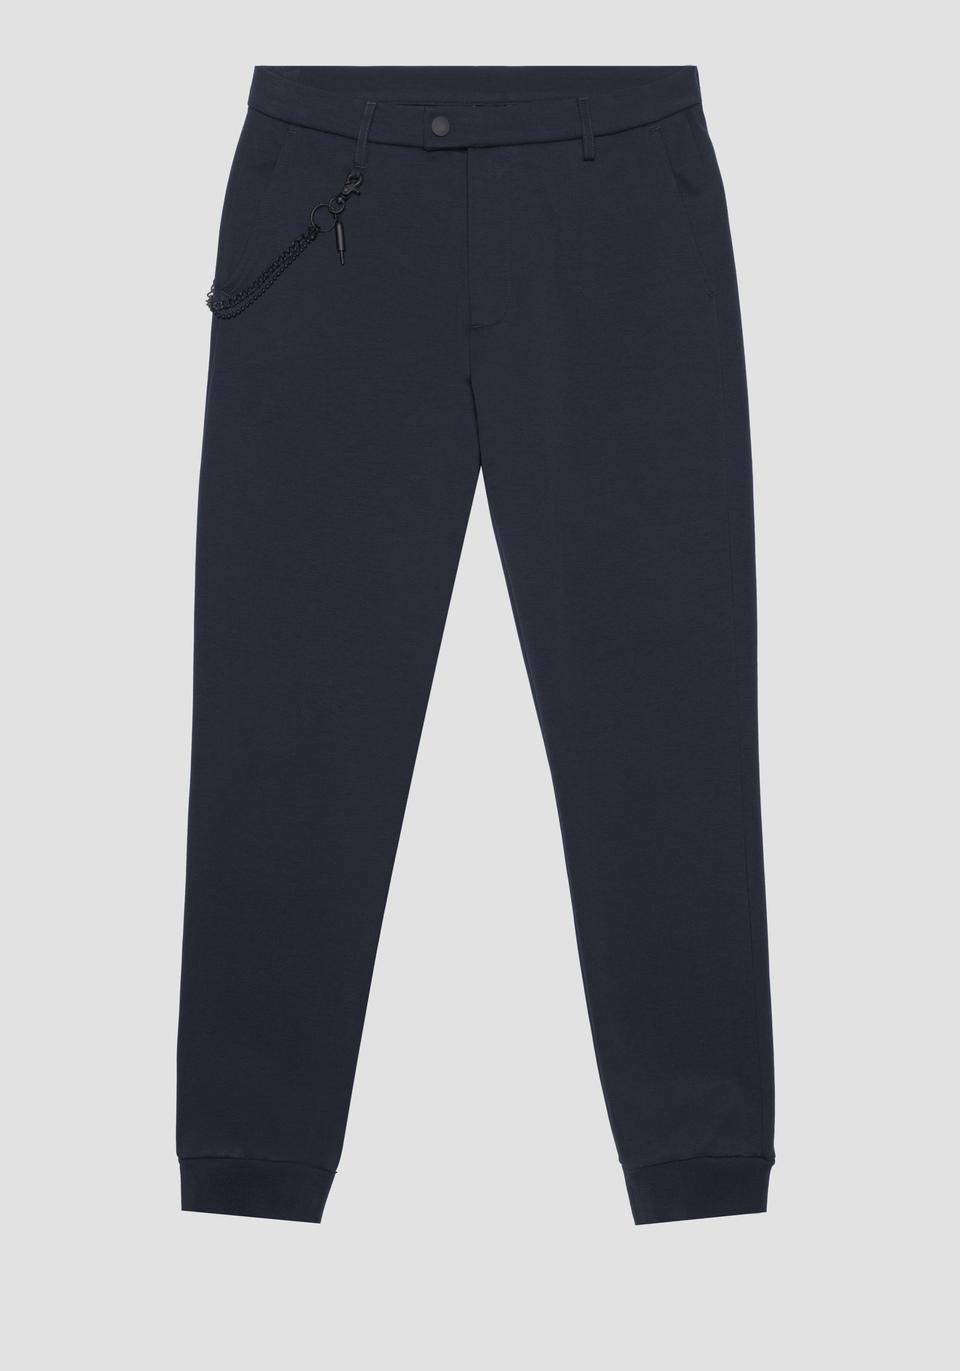 SKINNY FIT SWEATPANTS IN COTTON BLEND WITH BUTTON CLOSURE AND ELASTICATED HEM - Antony Morato Online Shop